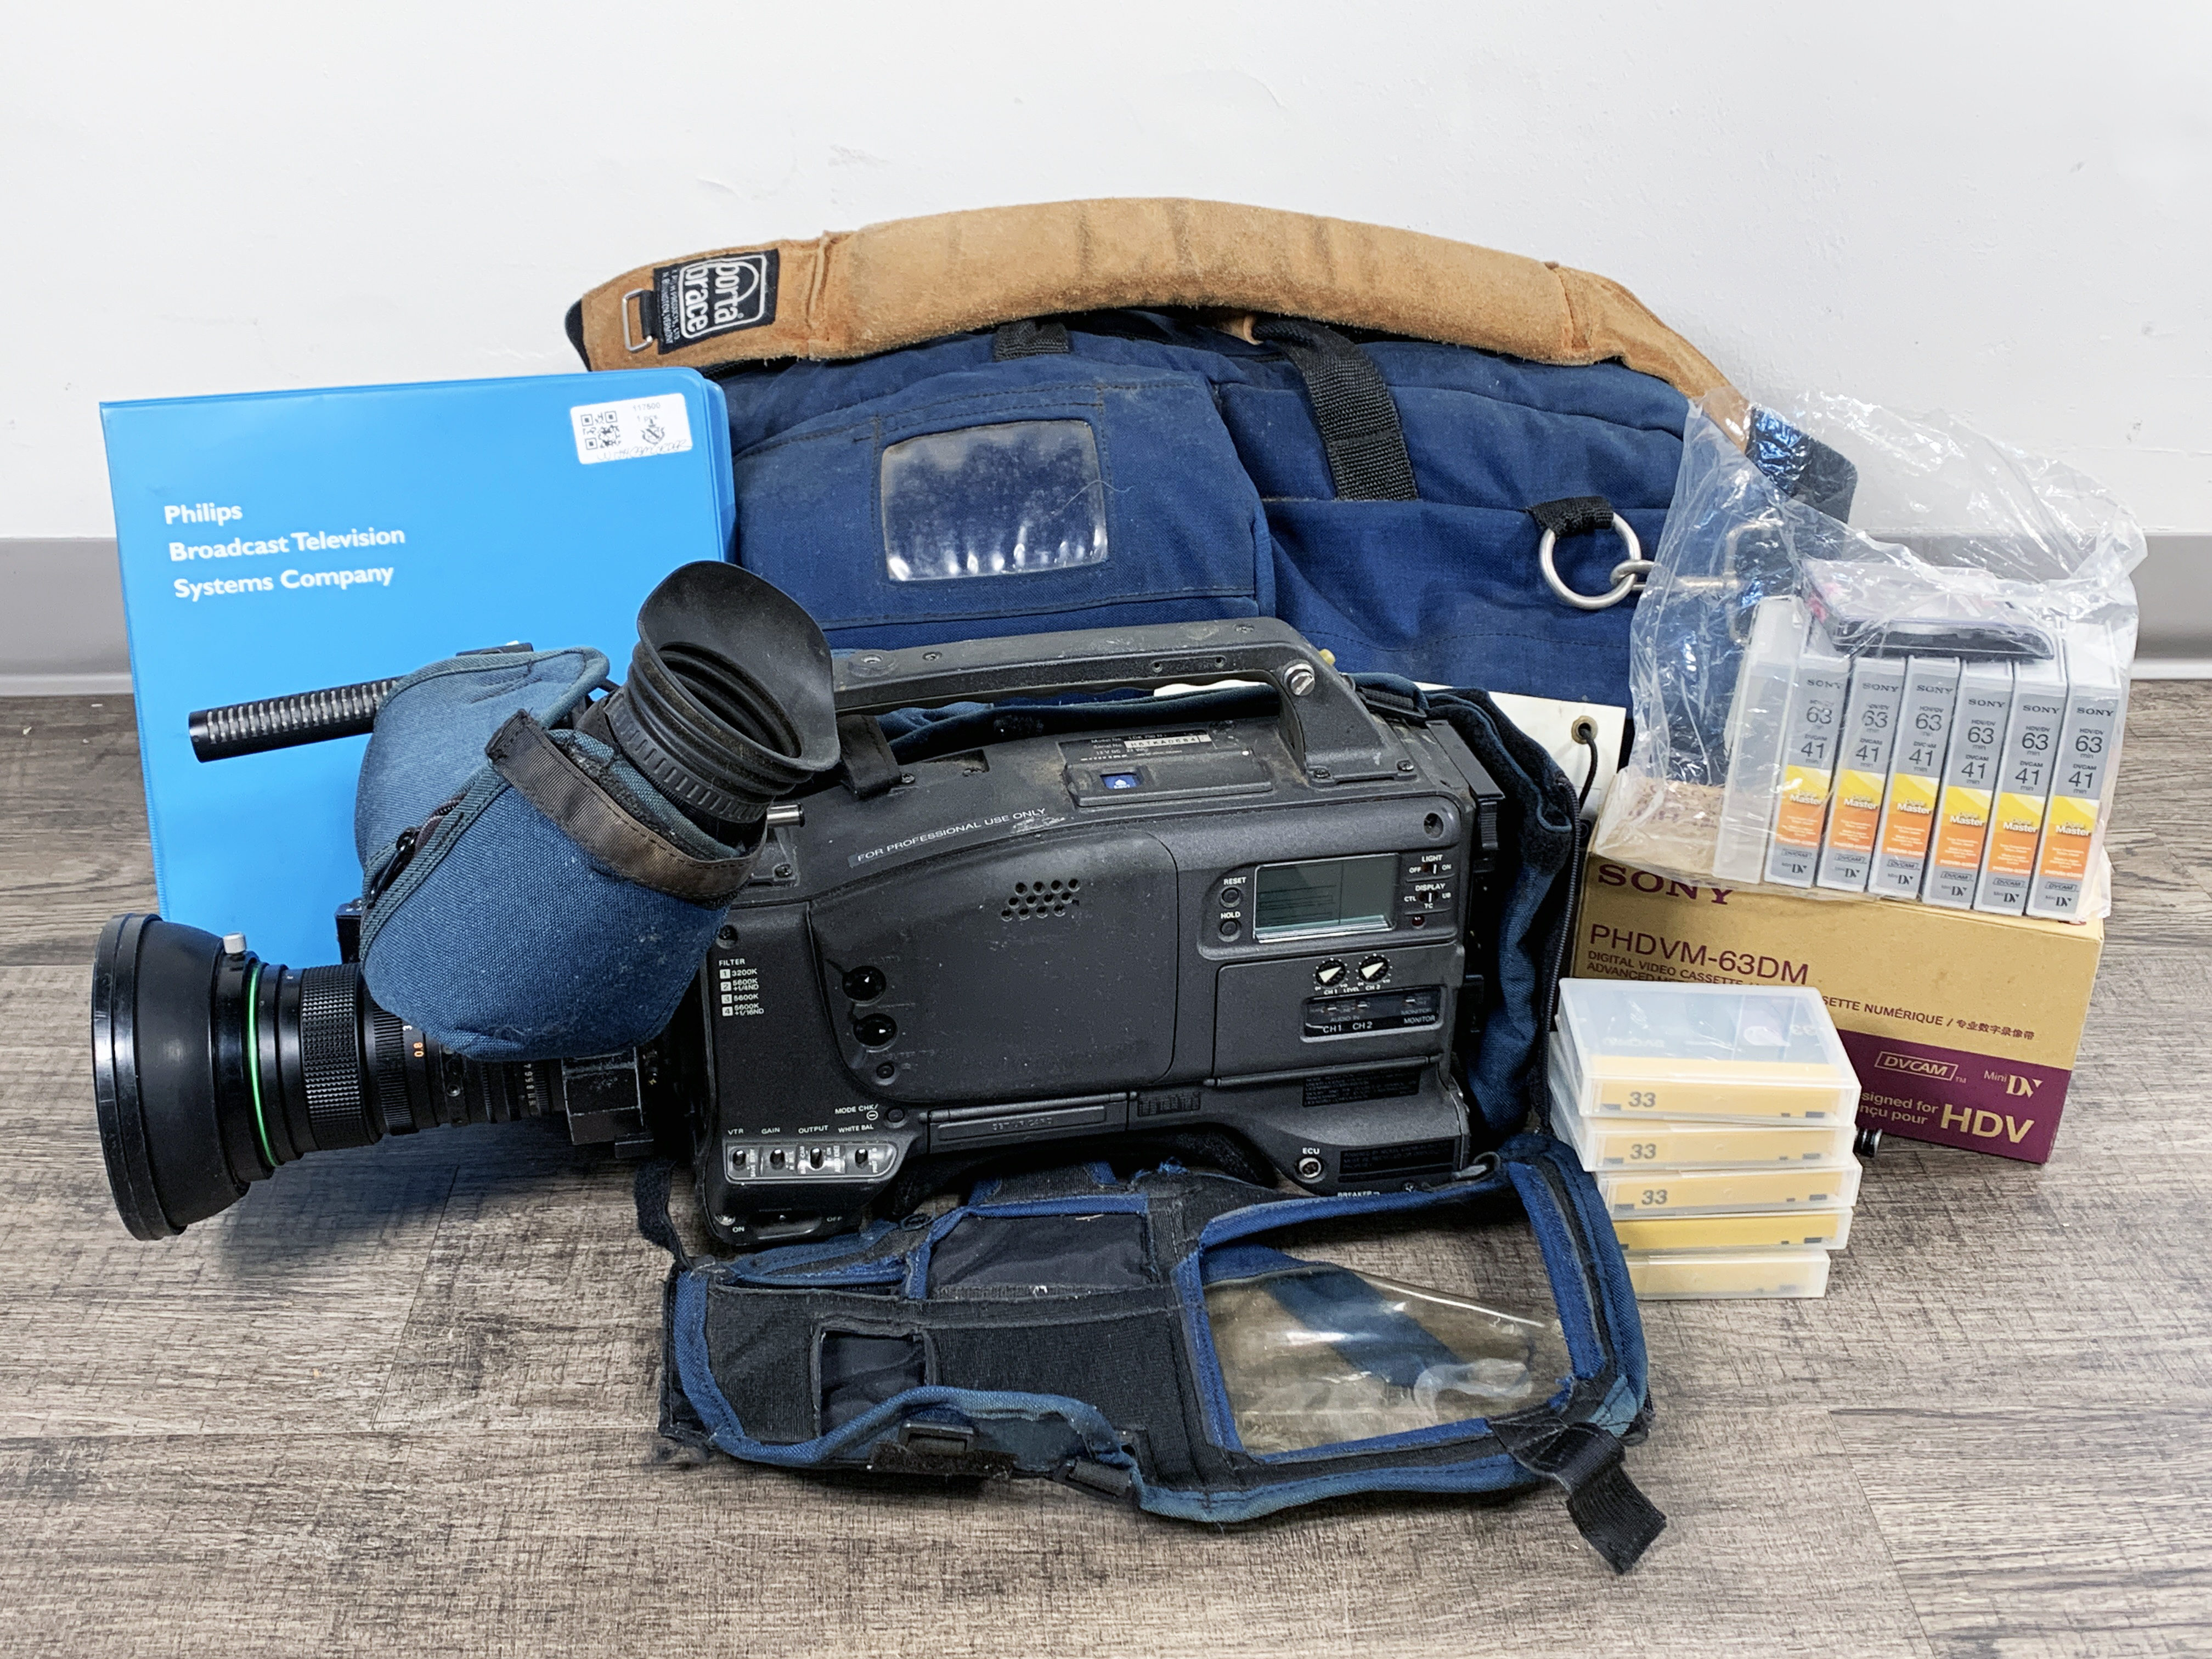 Phillips Digital Camcorder And Accessories image 1